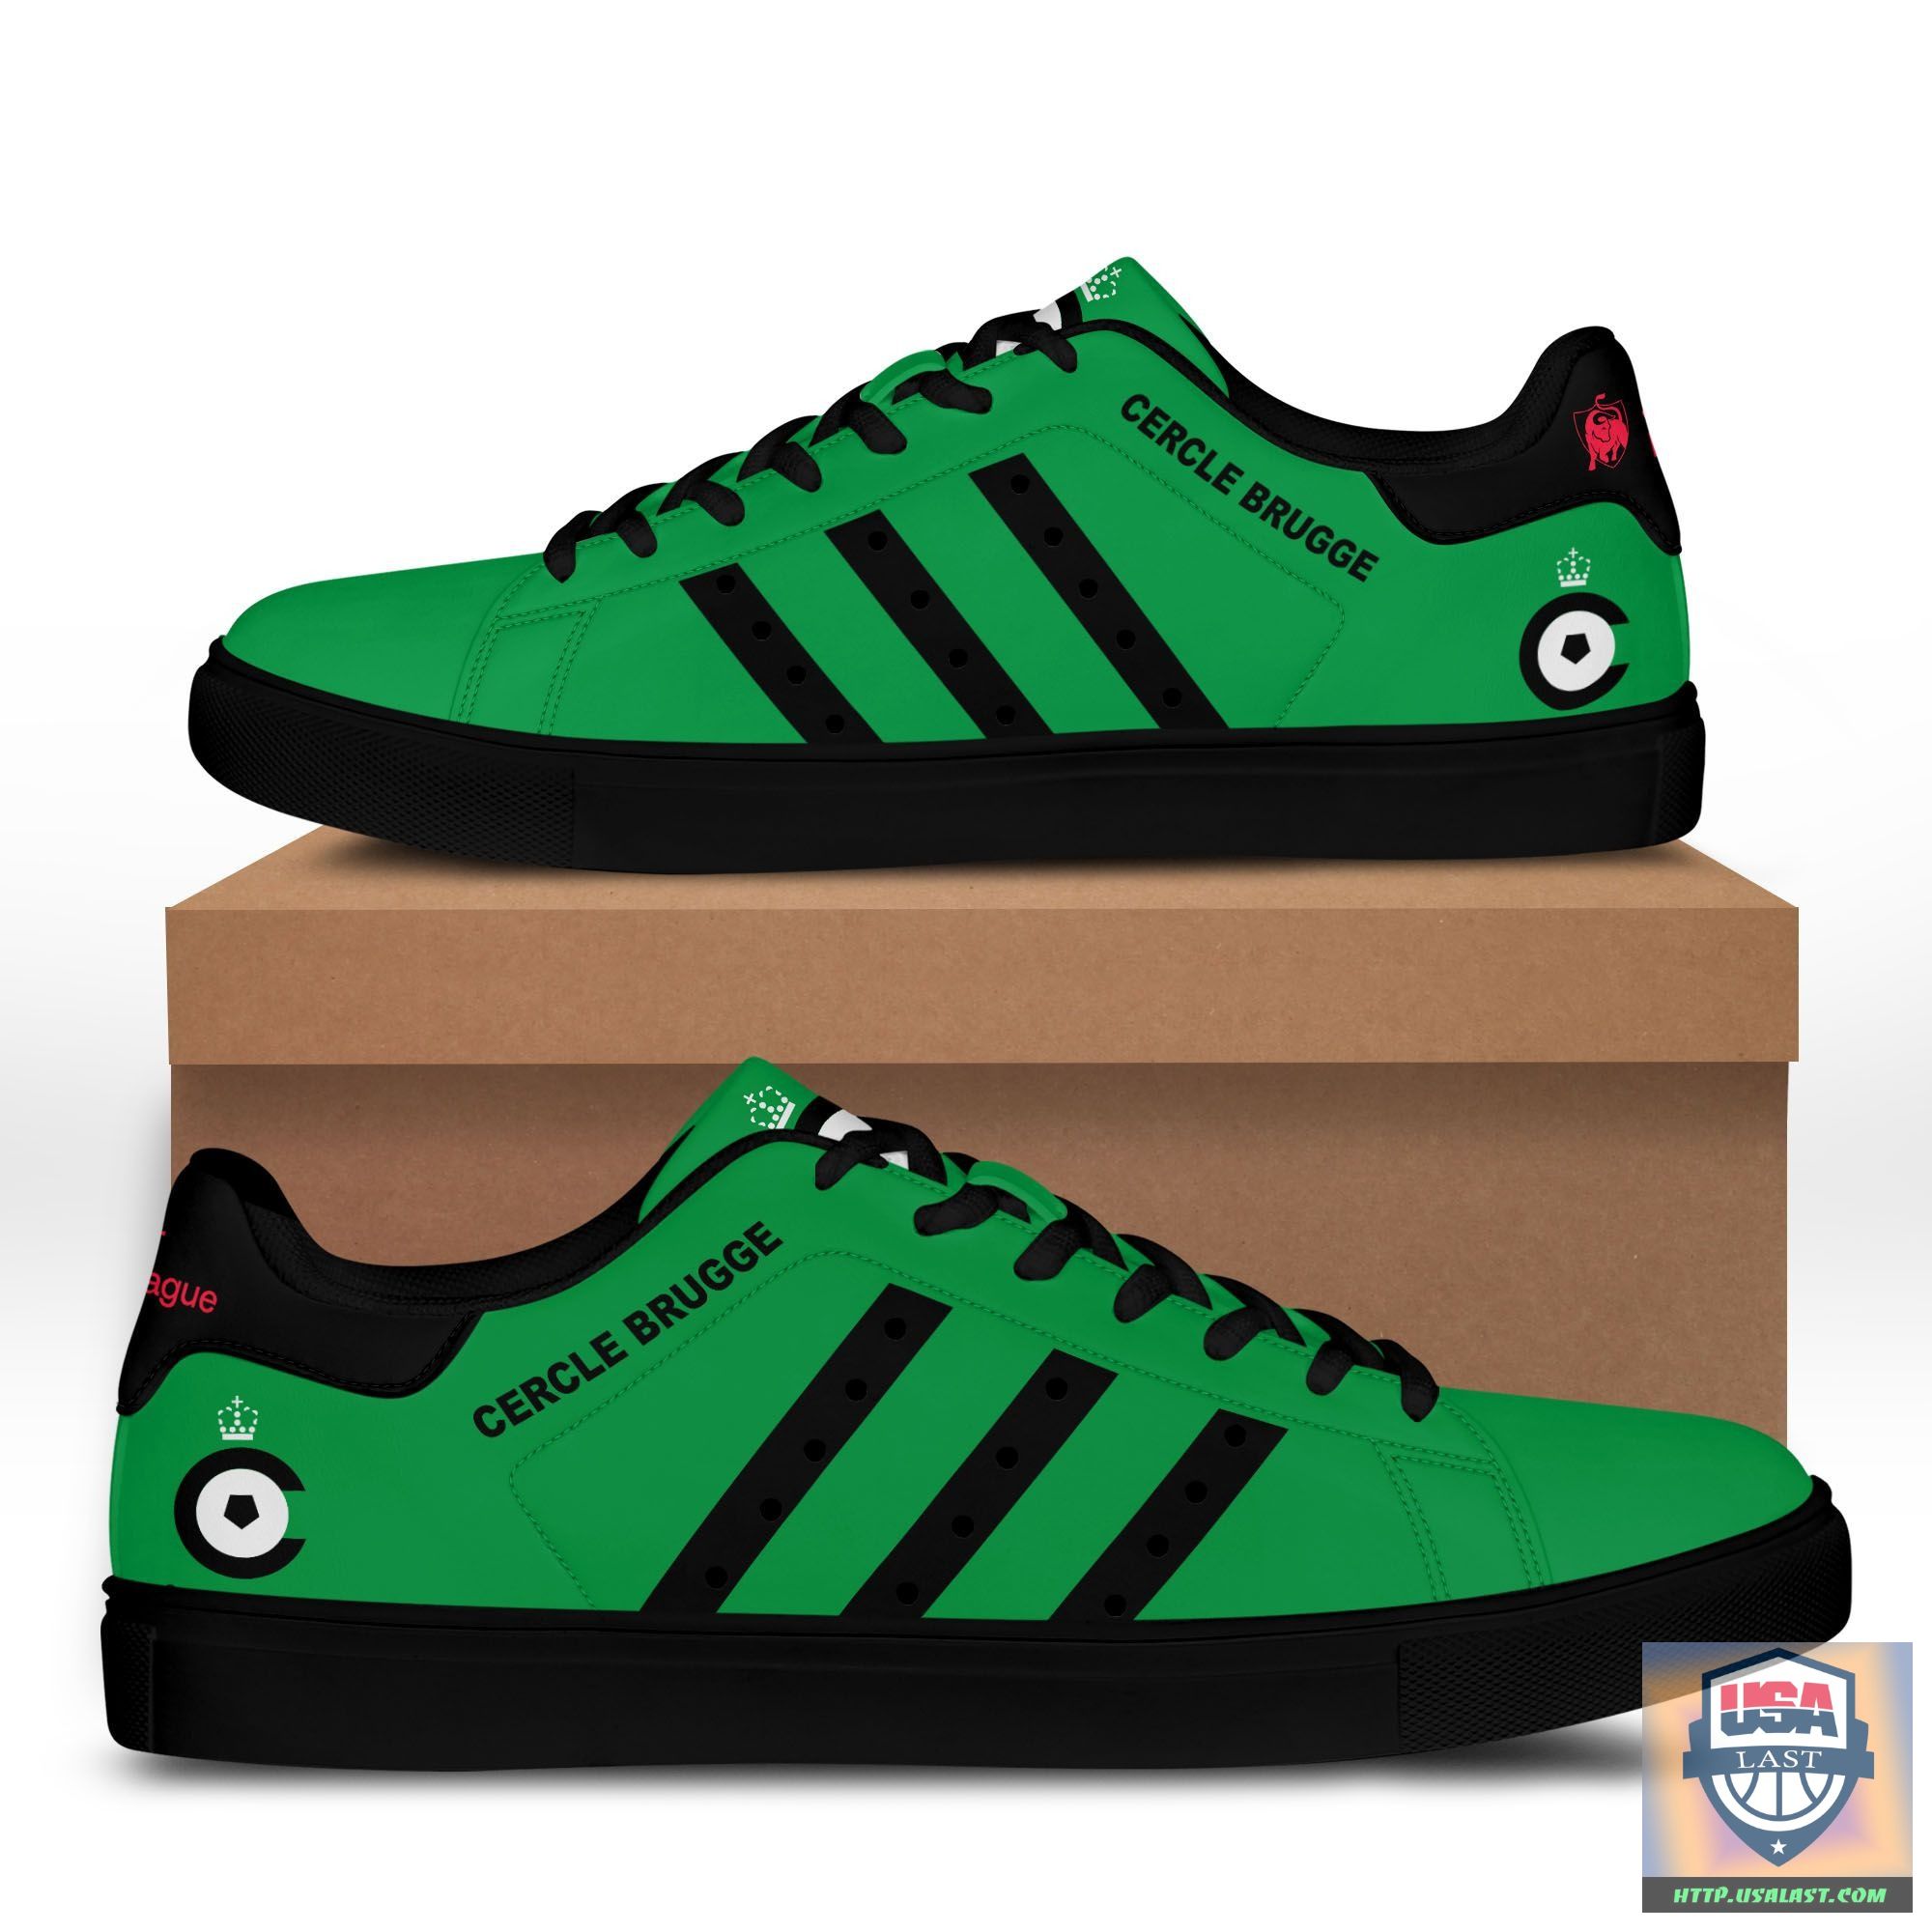 kLwgTOw6-T160822-01xxxCercle-Brugge-K.S.V-Skate-Low-Top-Shoes-Green-Version.jpg